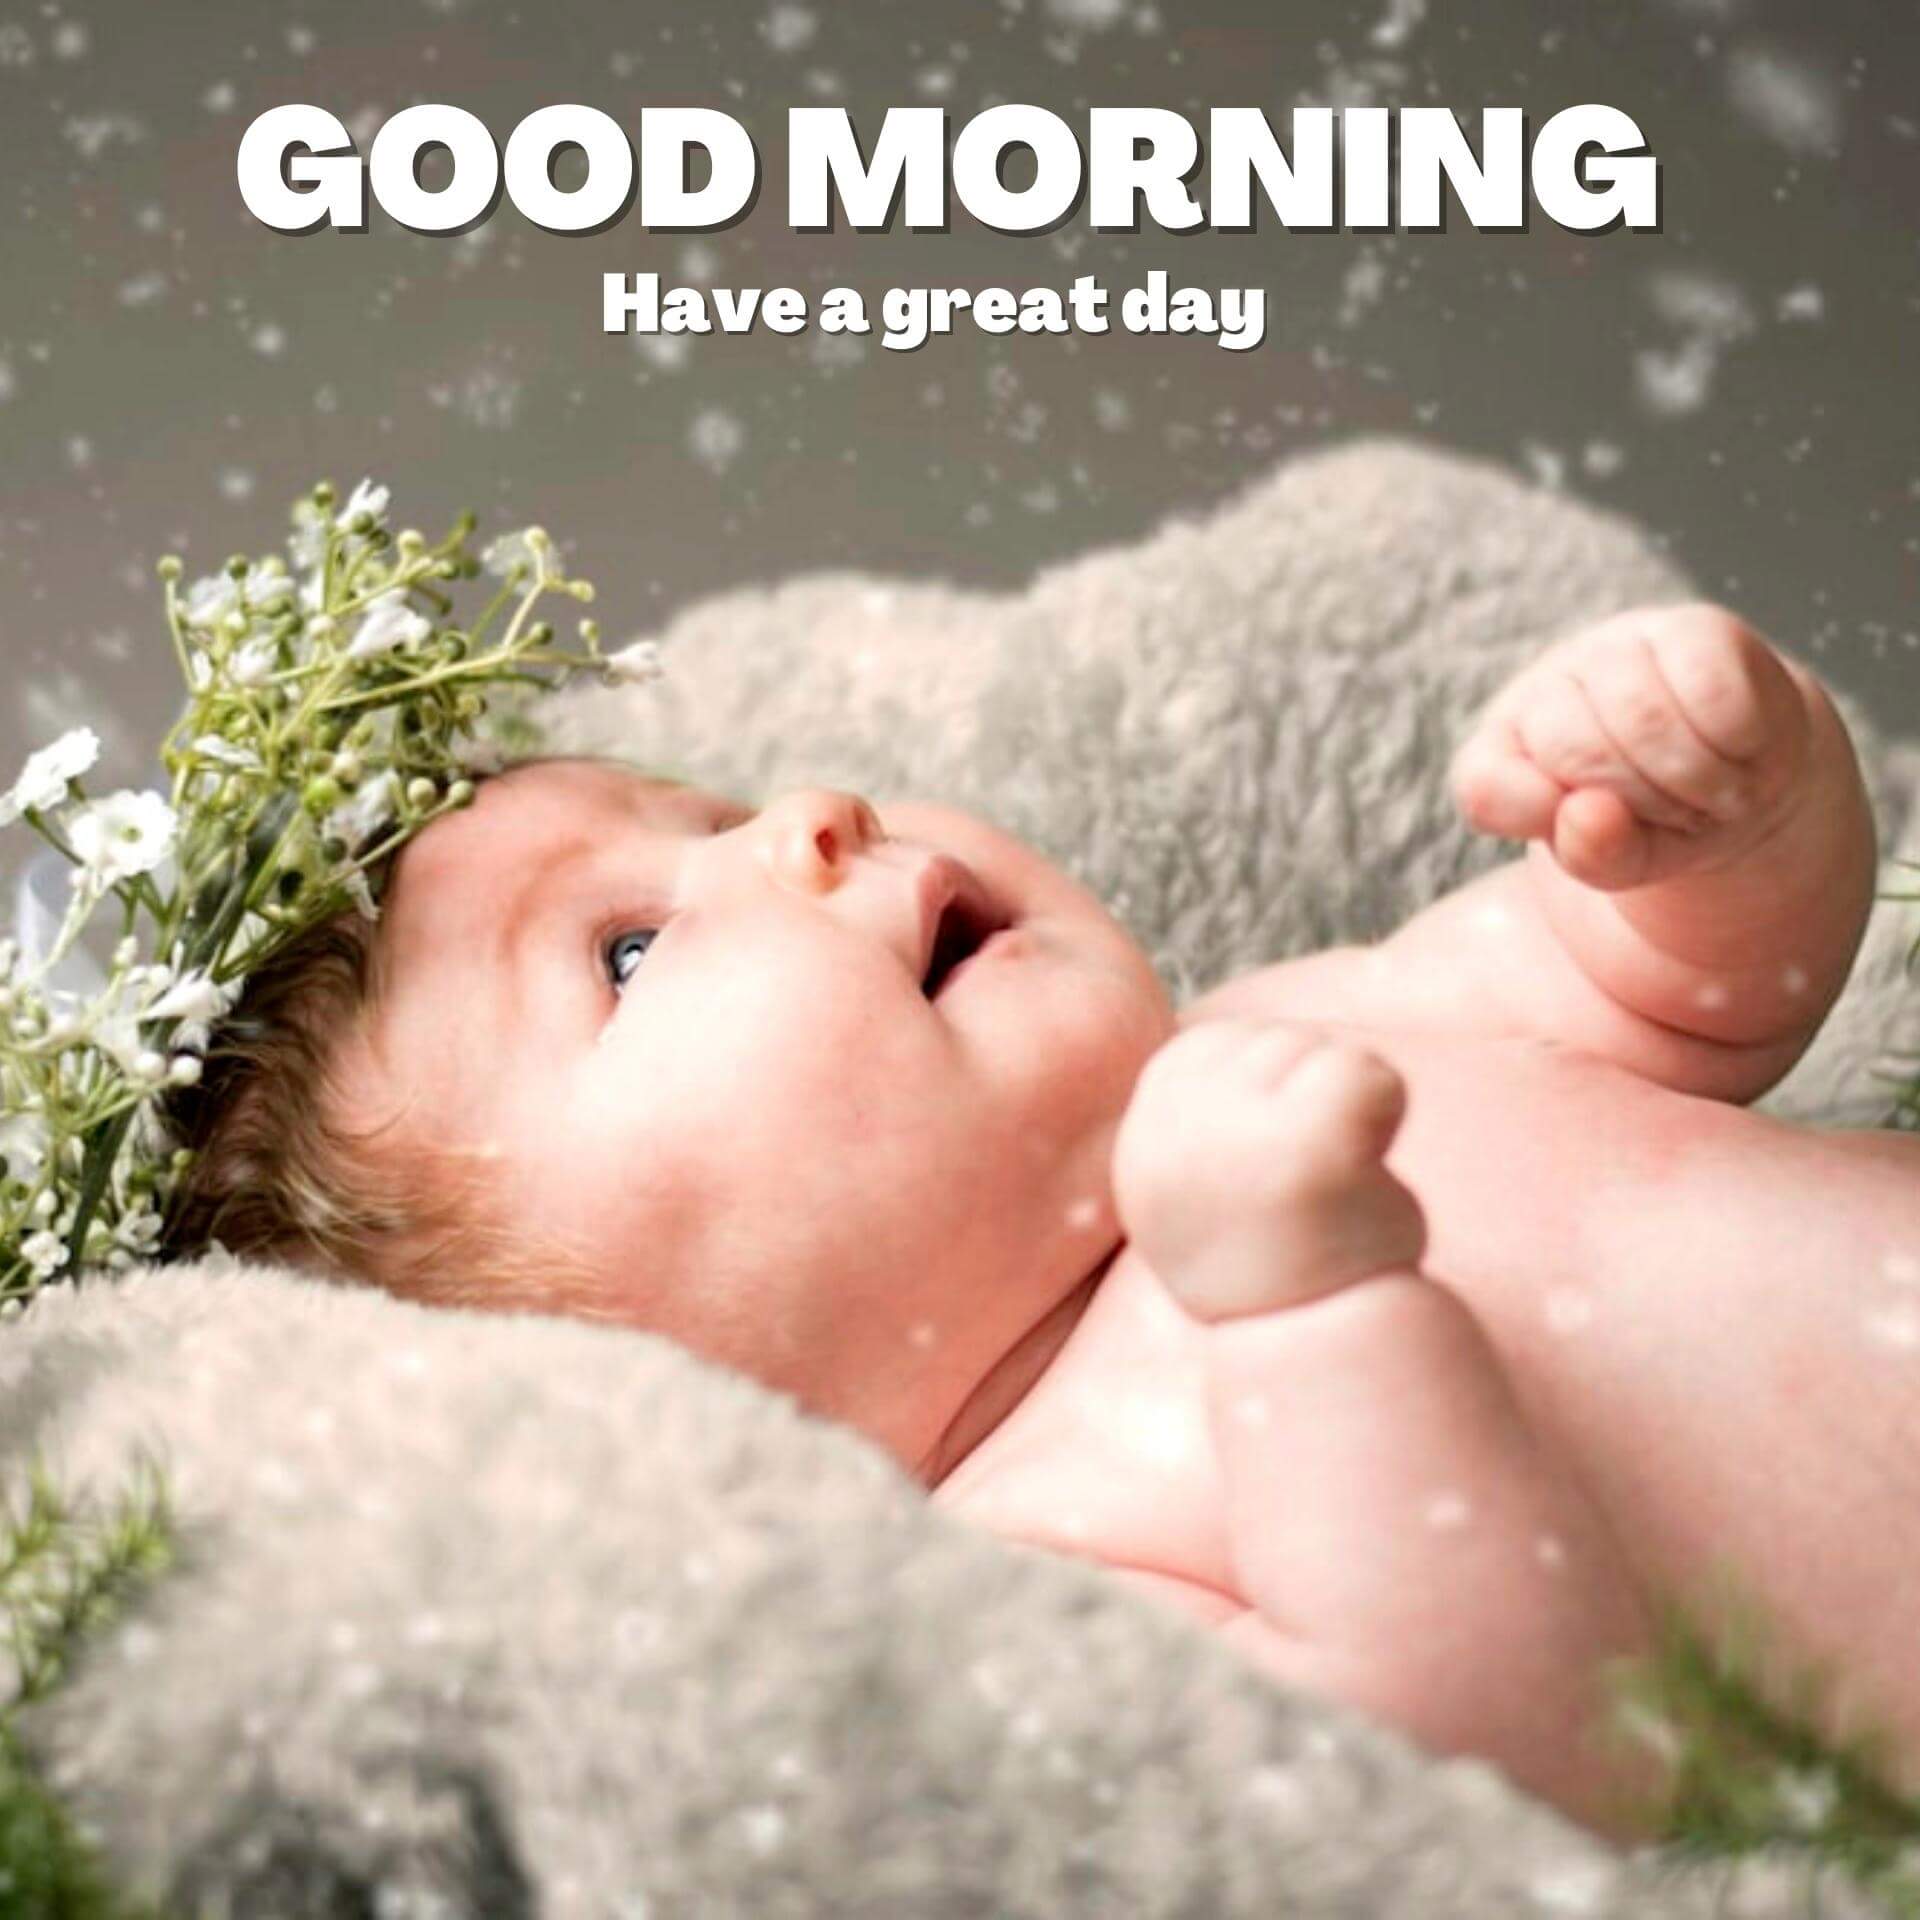 Good Morning baby Images